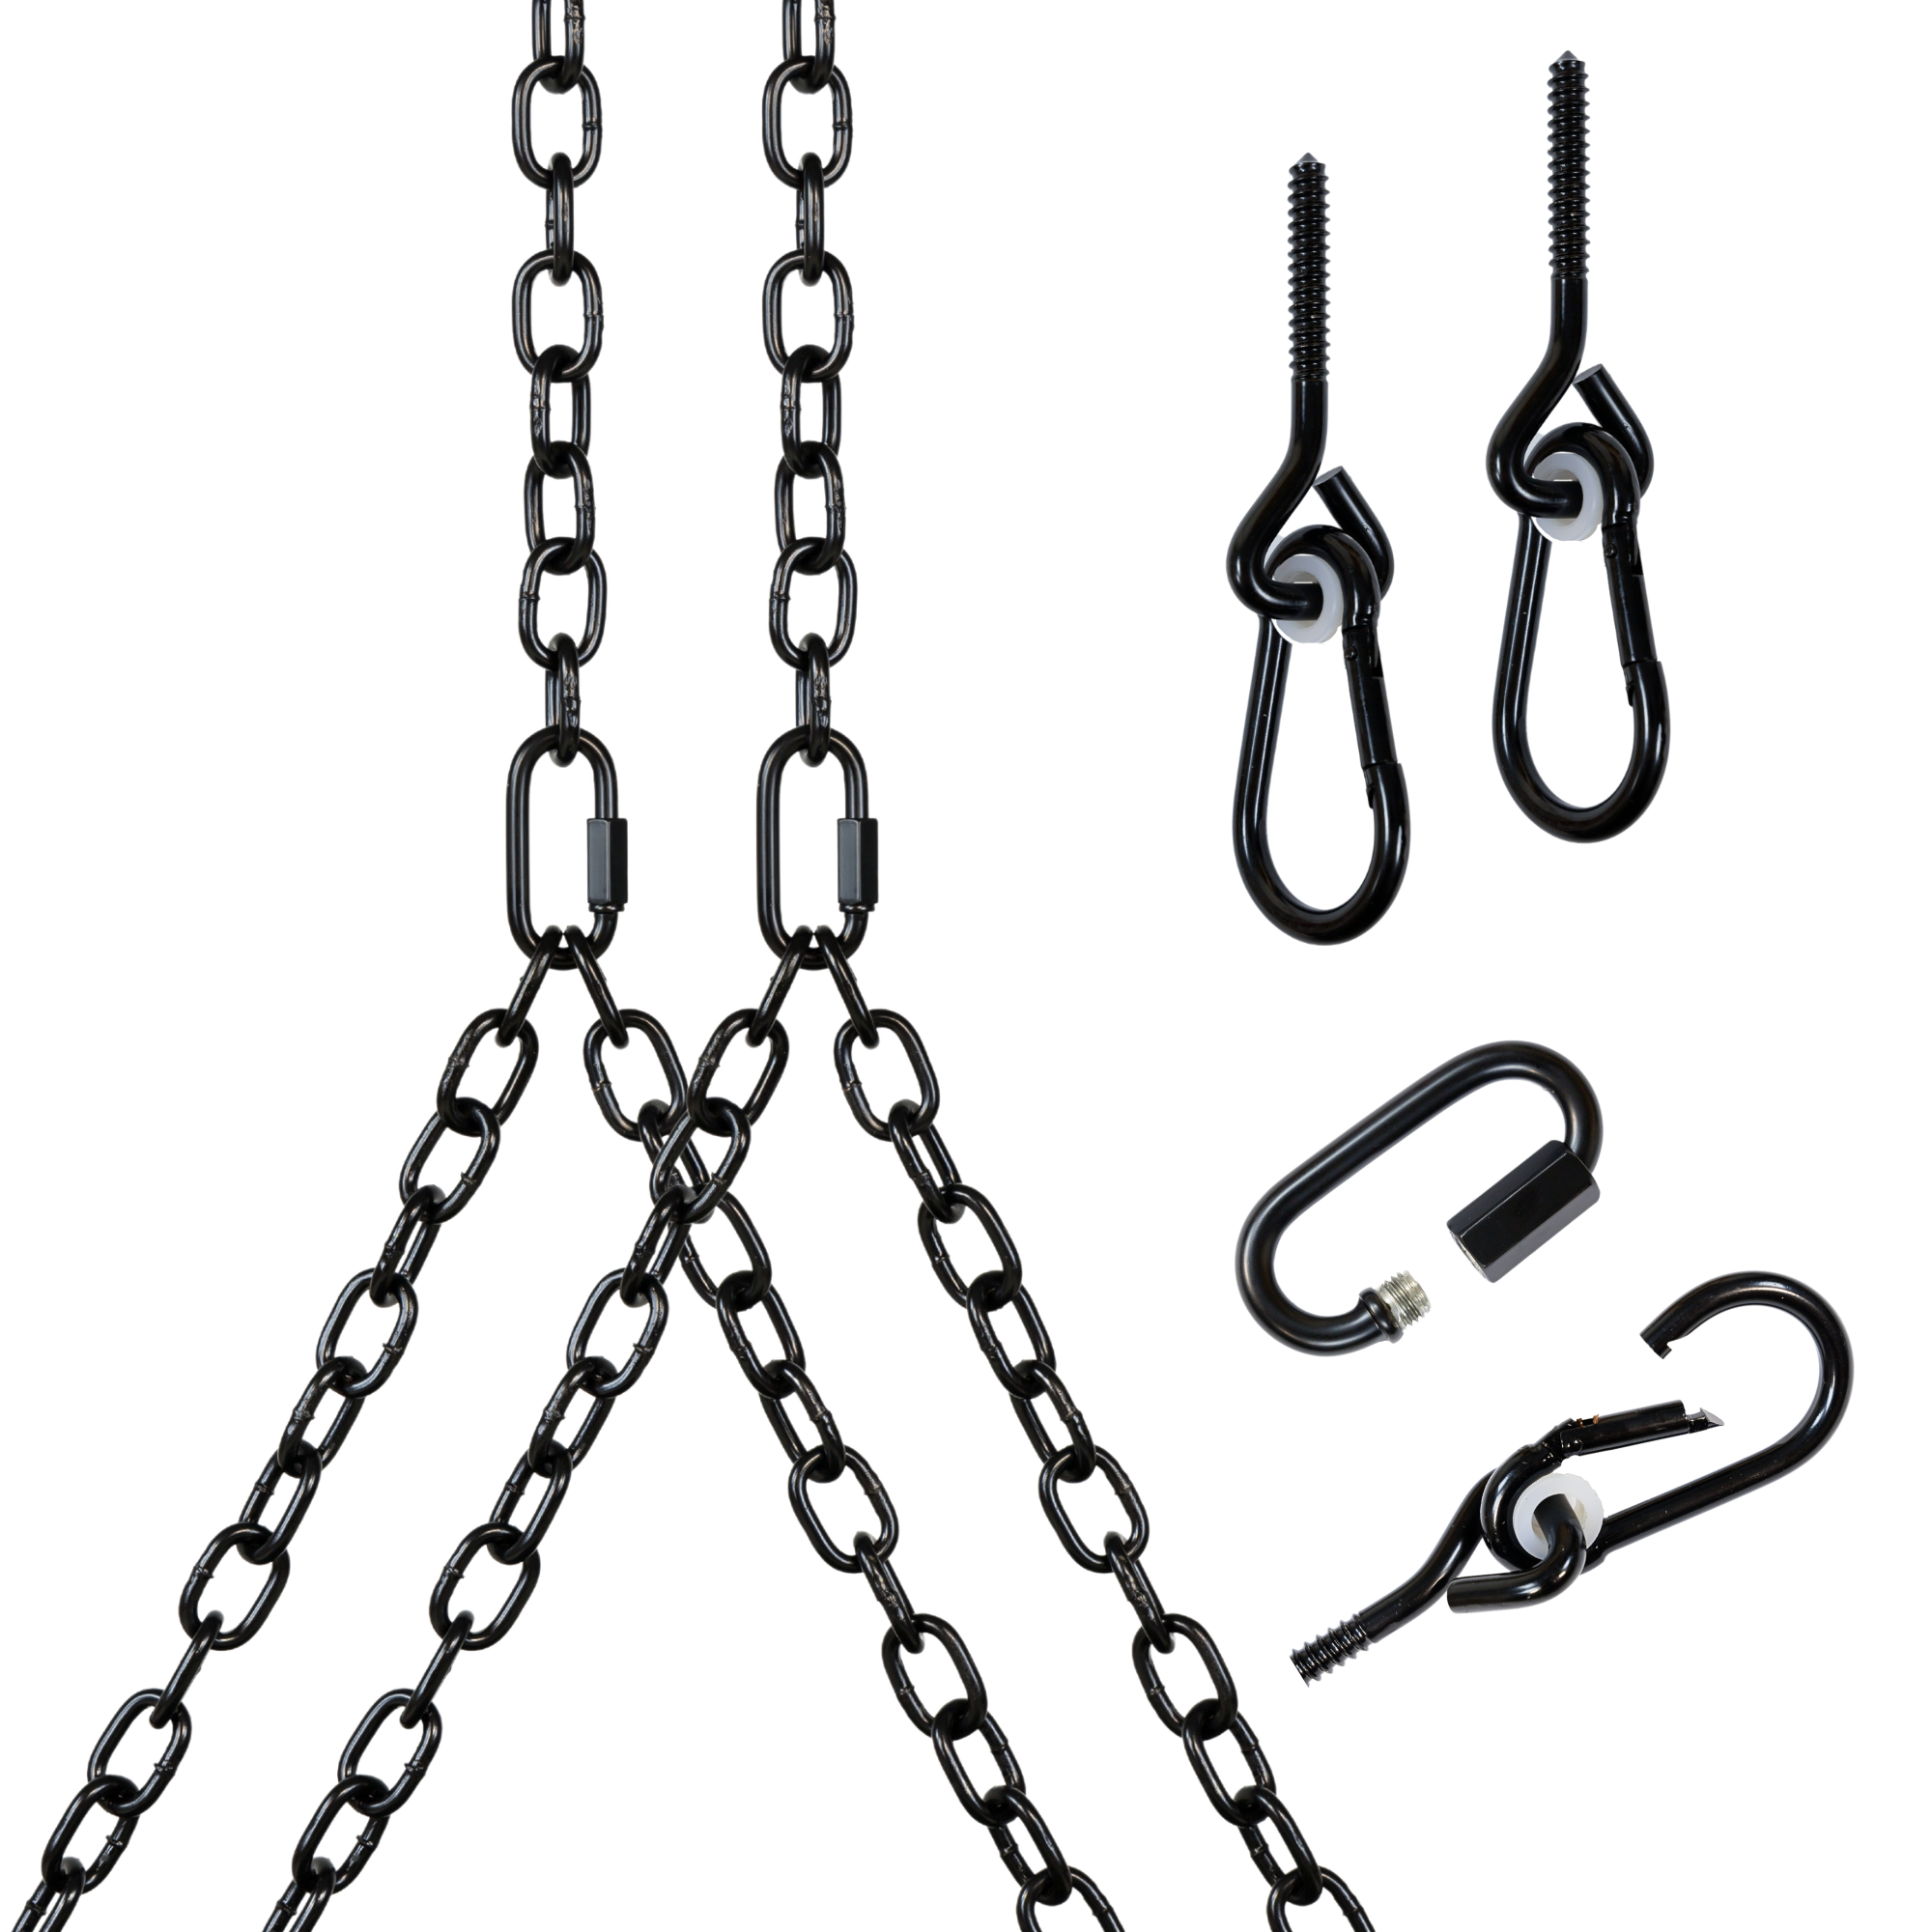 Hanging Chains Photos and Images